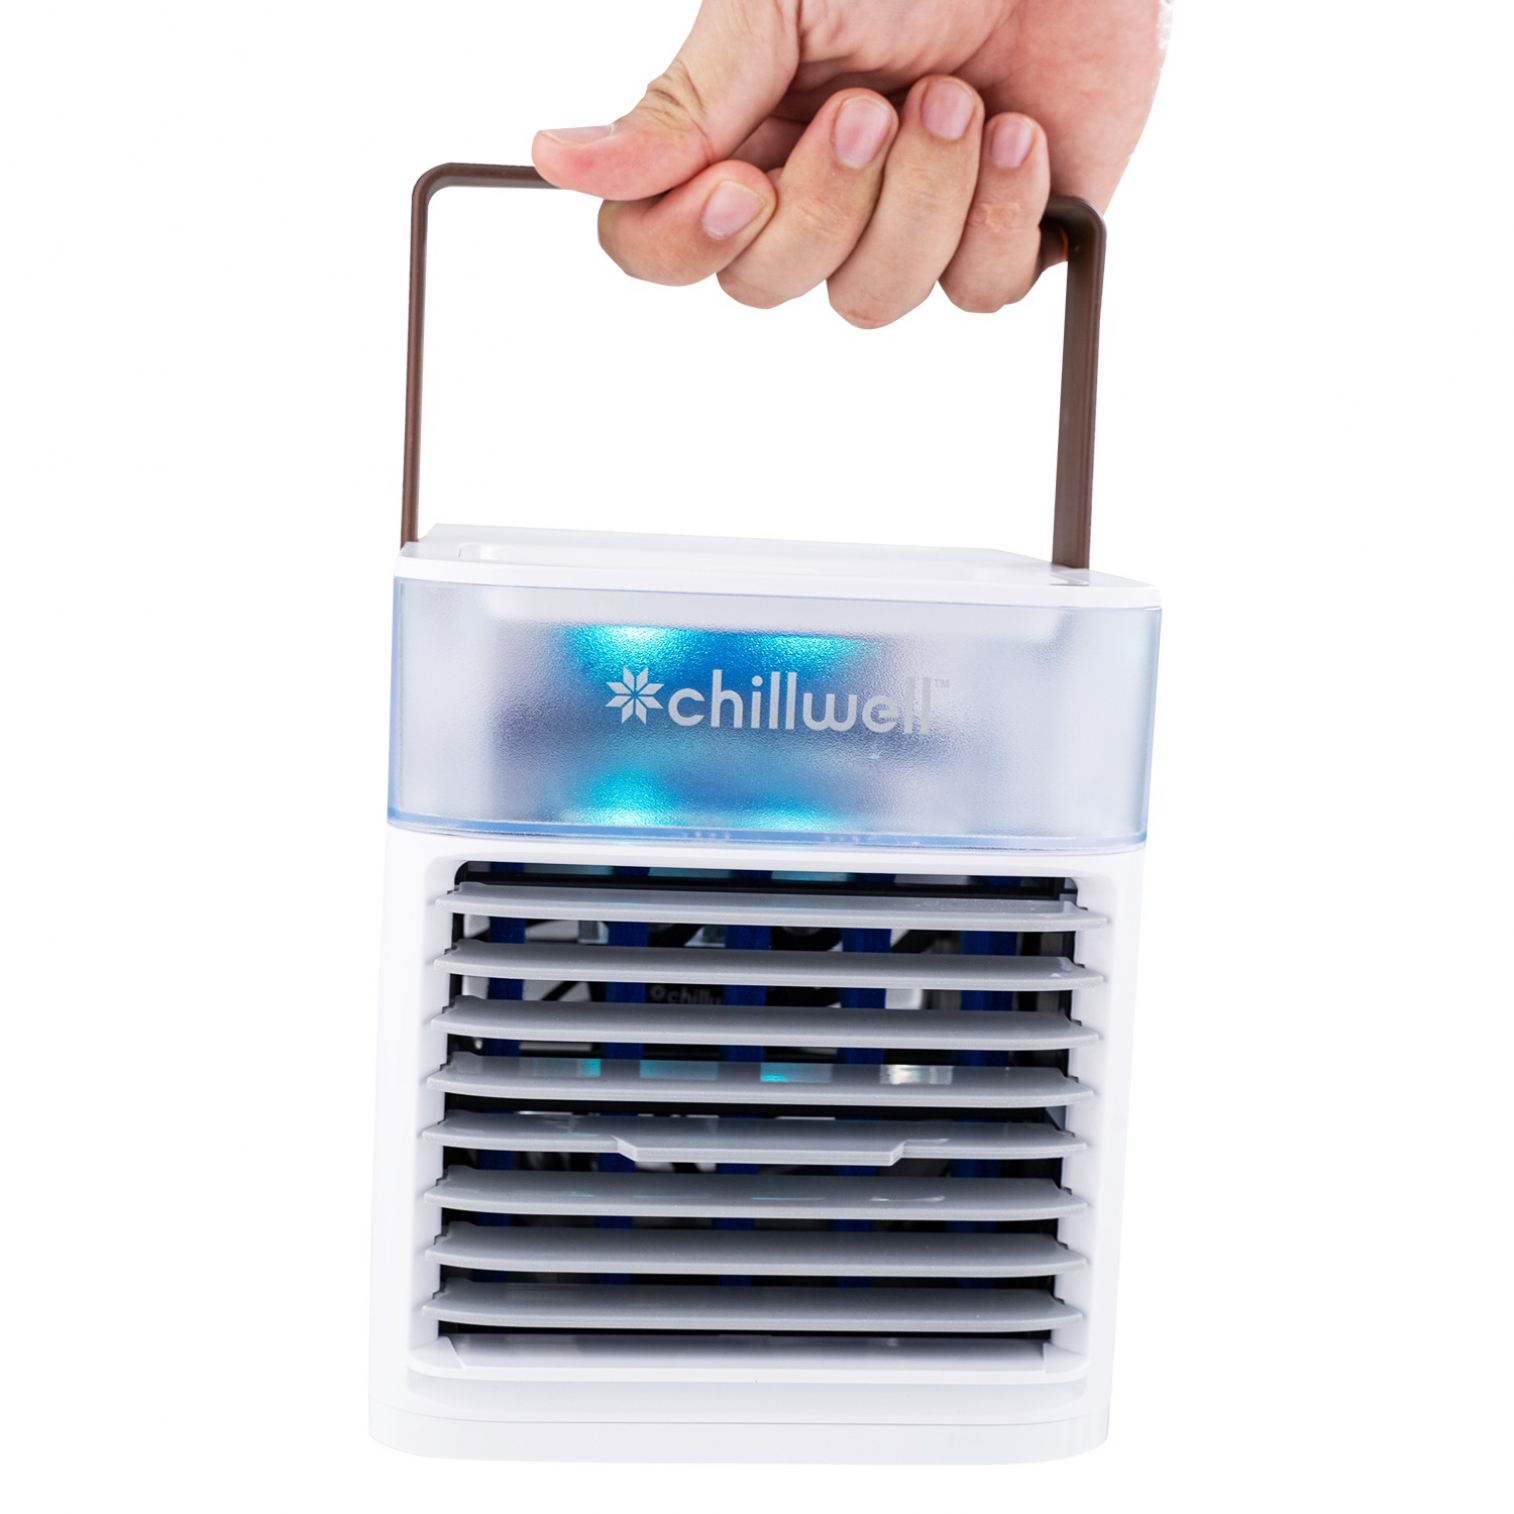 Chillwell Ac Portable Air Conditioner Where To Buy